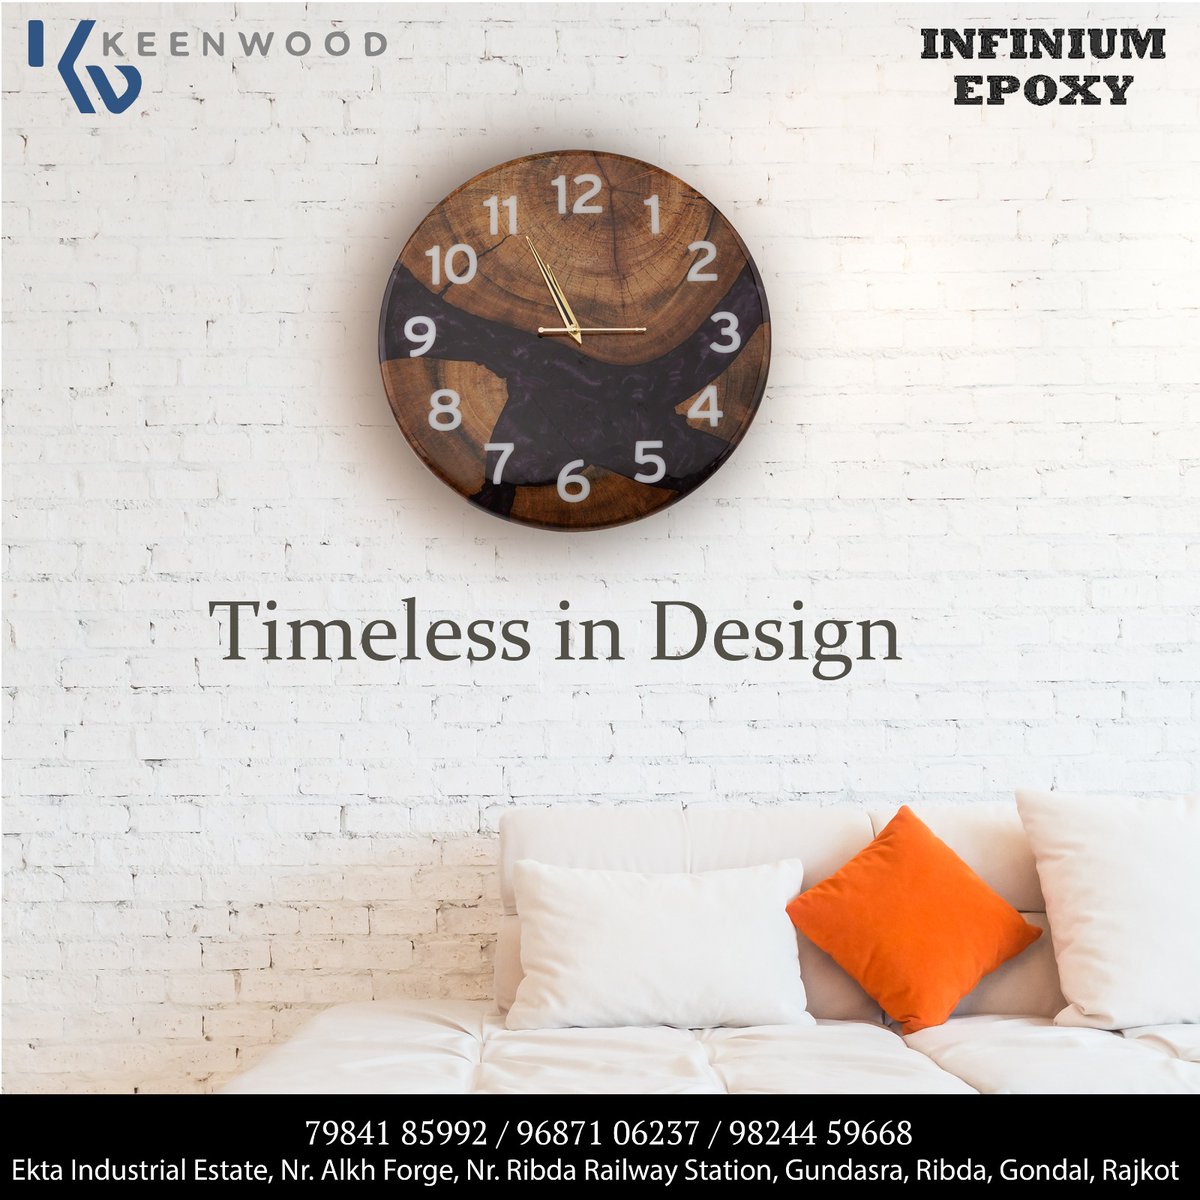 Flourish your wall with Our Customized Resin Wall Clock 
For Order Call us:- 079841 85992 / 96871 06237

.
.
.
#infiniumepoxy #infinium #furniture #resinartdesign #resinartsupplies #wallclockdesign #wallclockvintage #resinwallclock #diningtabledesign #diningtablestyling